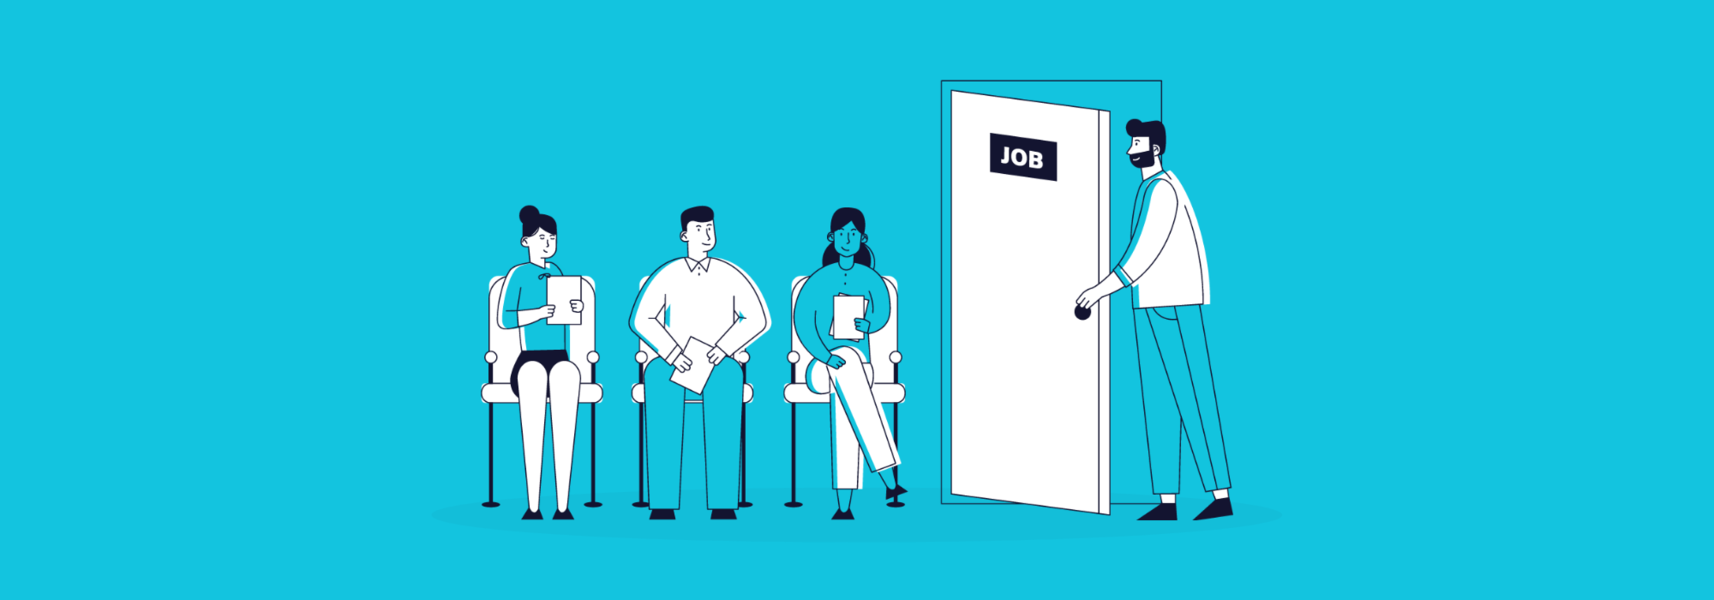 6 Tips for entry-level recruitment roles: How to stand out when applying